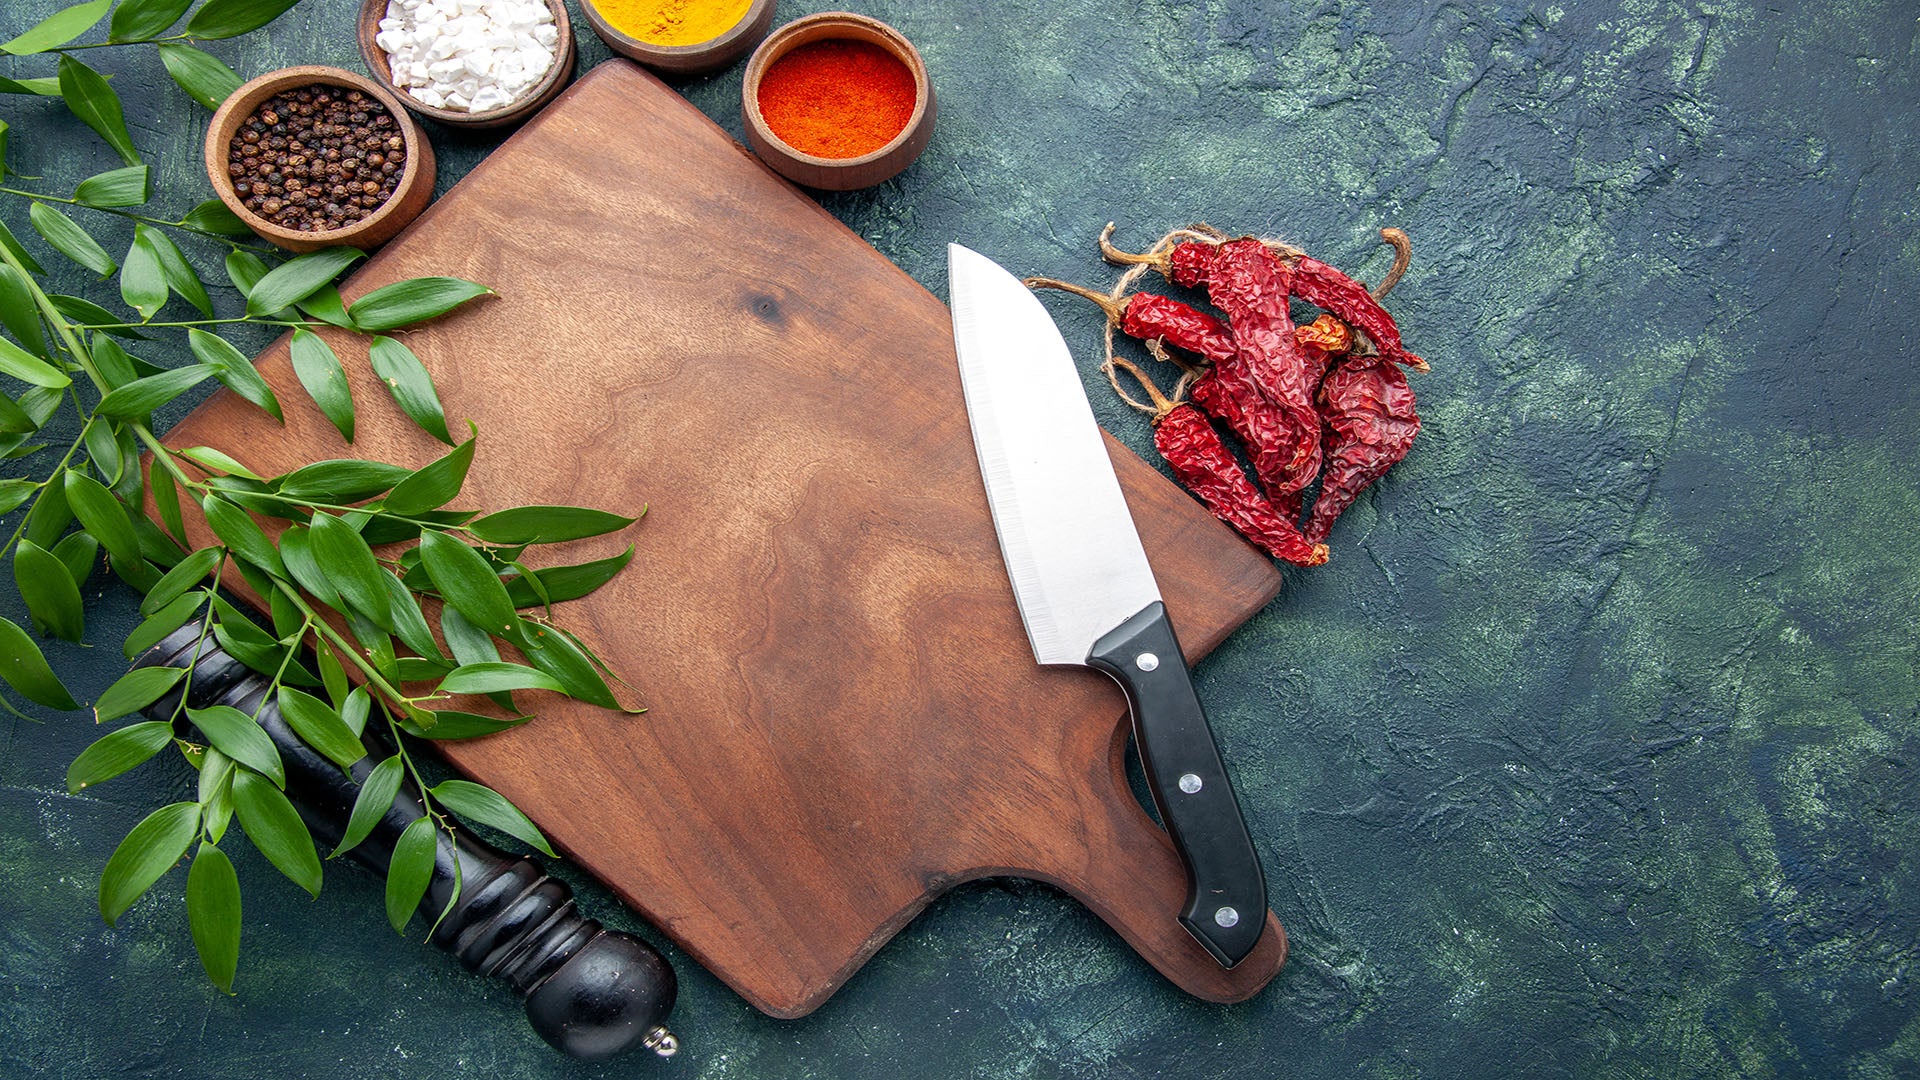 http://cookingpanda.com/cdn/shop/articles/top-view-different-seasonings-with-brown-wooden-desk-dark-blue-background-color-wood-sharp-cutlery-tree-green-kitchen.jpg?v=1693647163